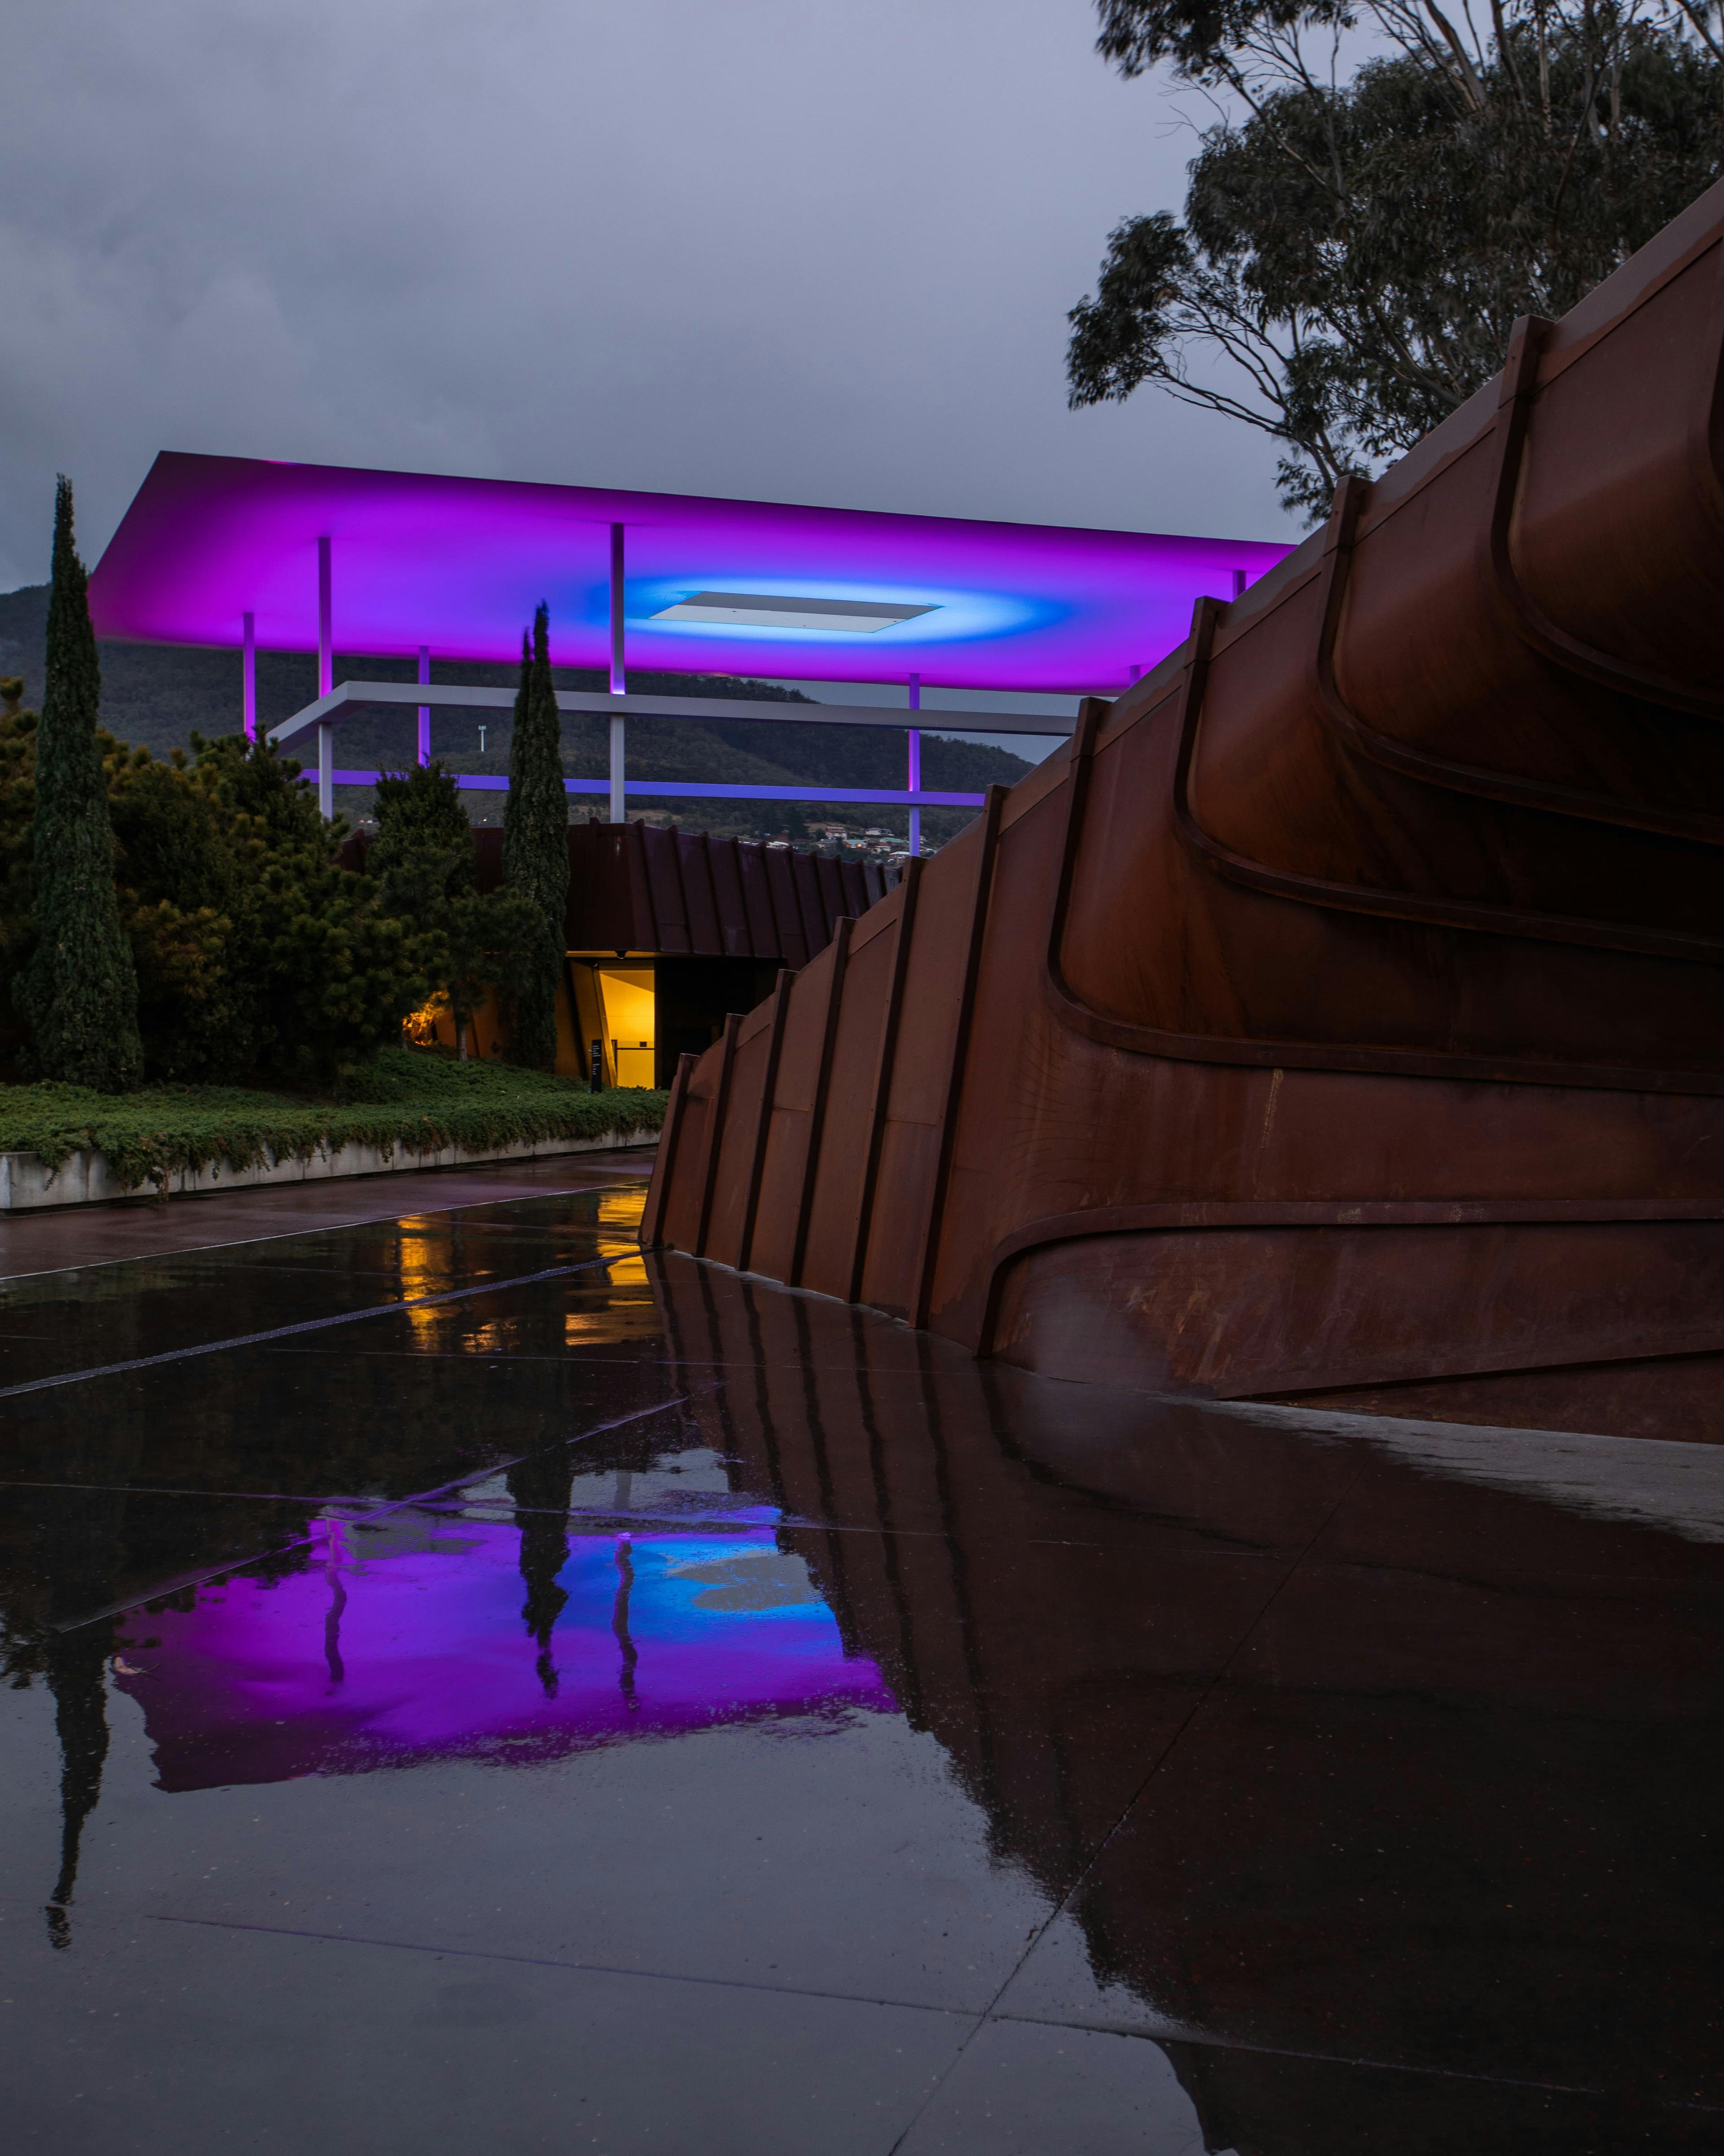 A large structure in the background shines hues of pinks and blues, reflecting off a puddle in front of a corten steel structure.